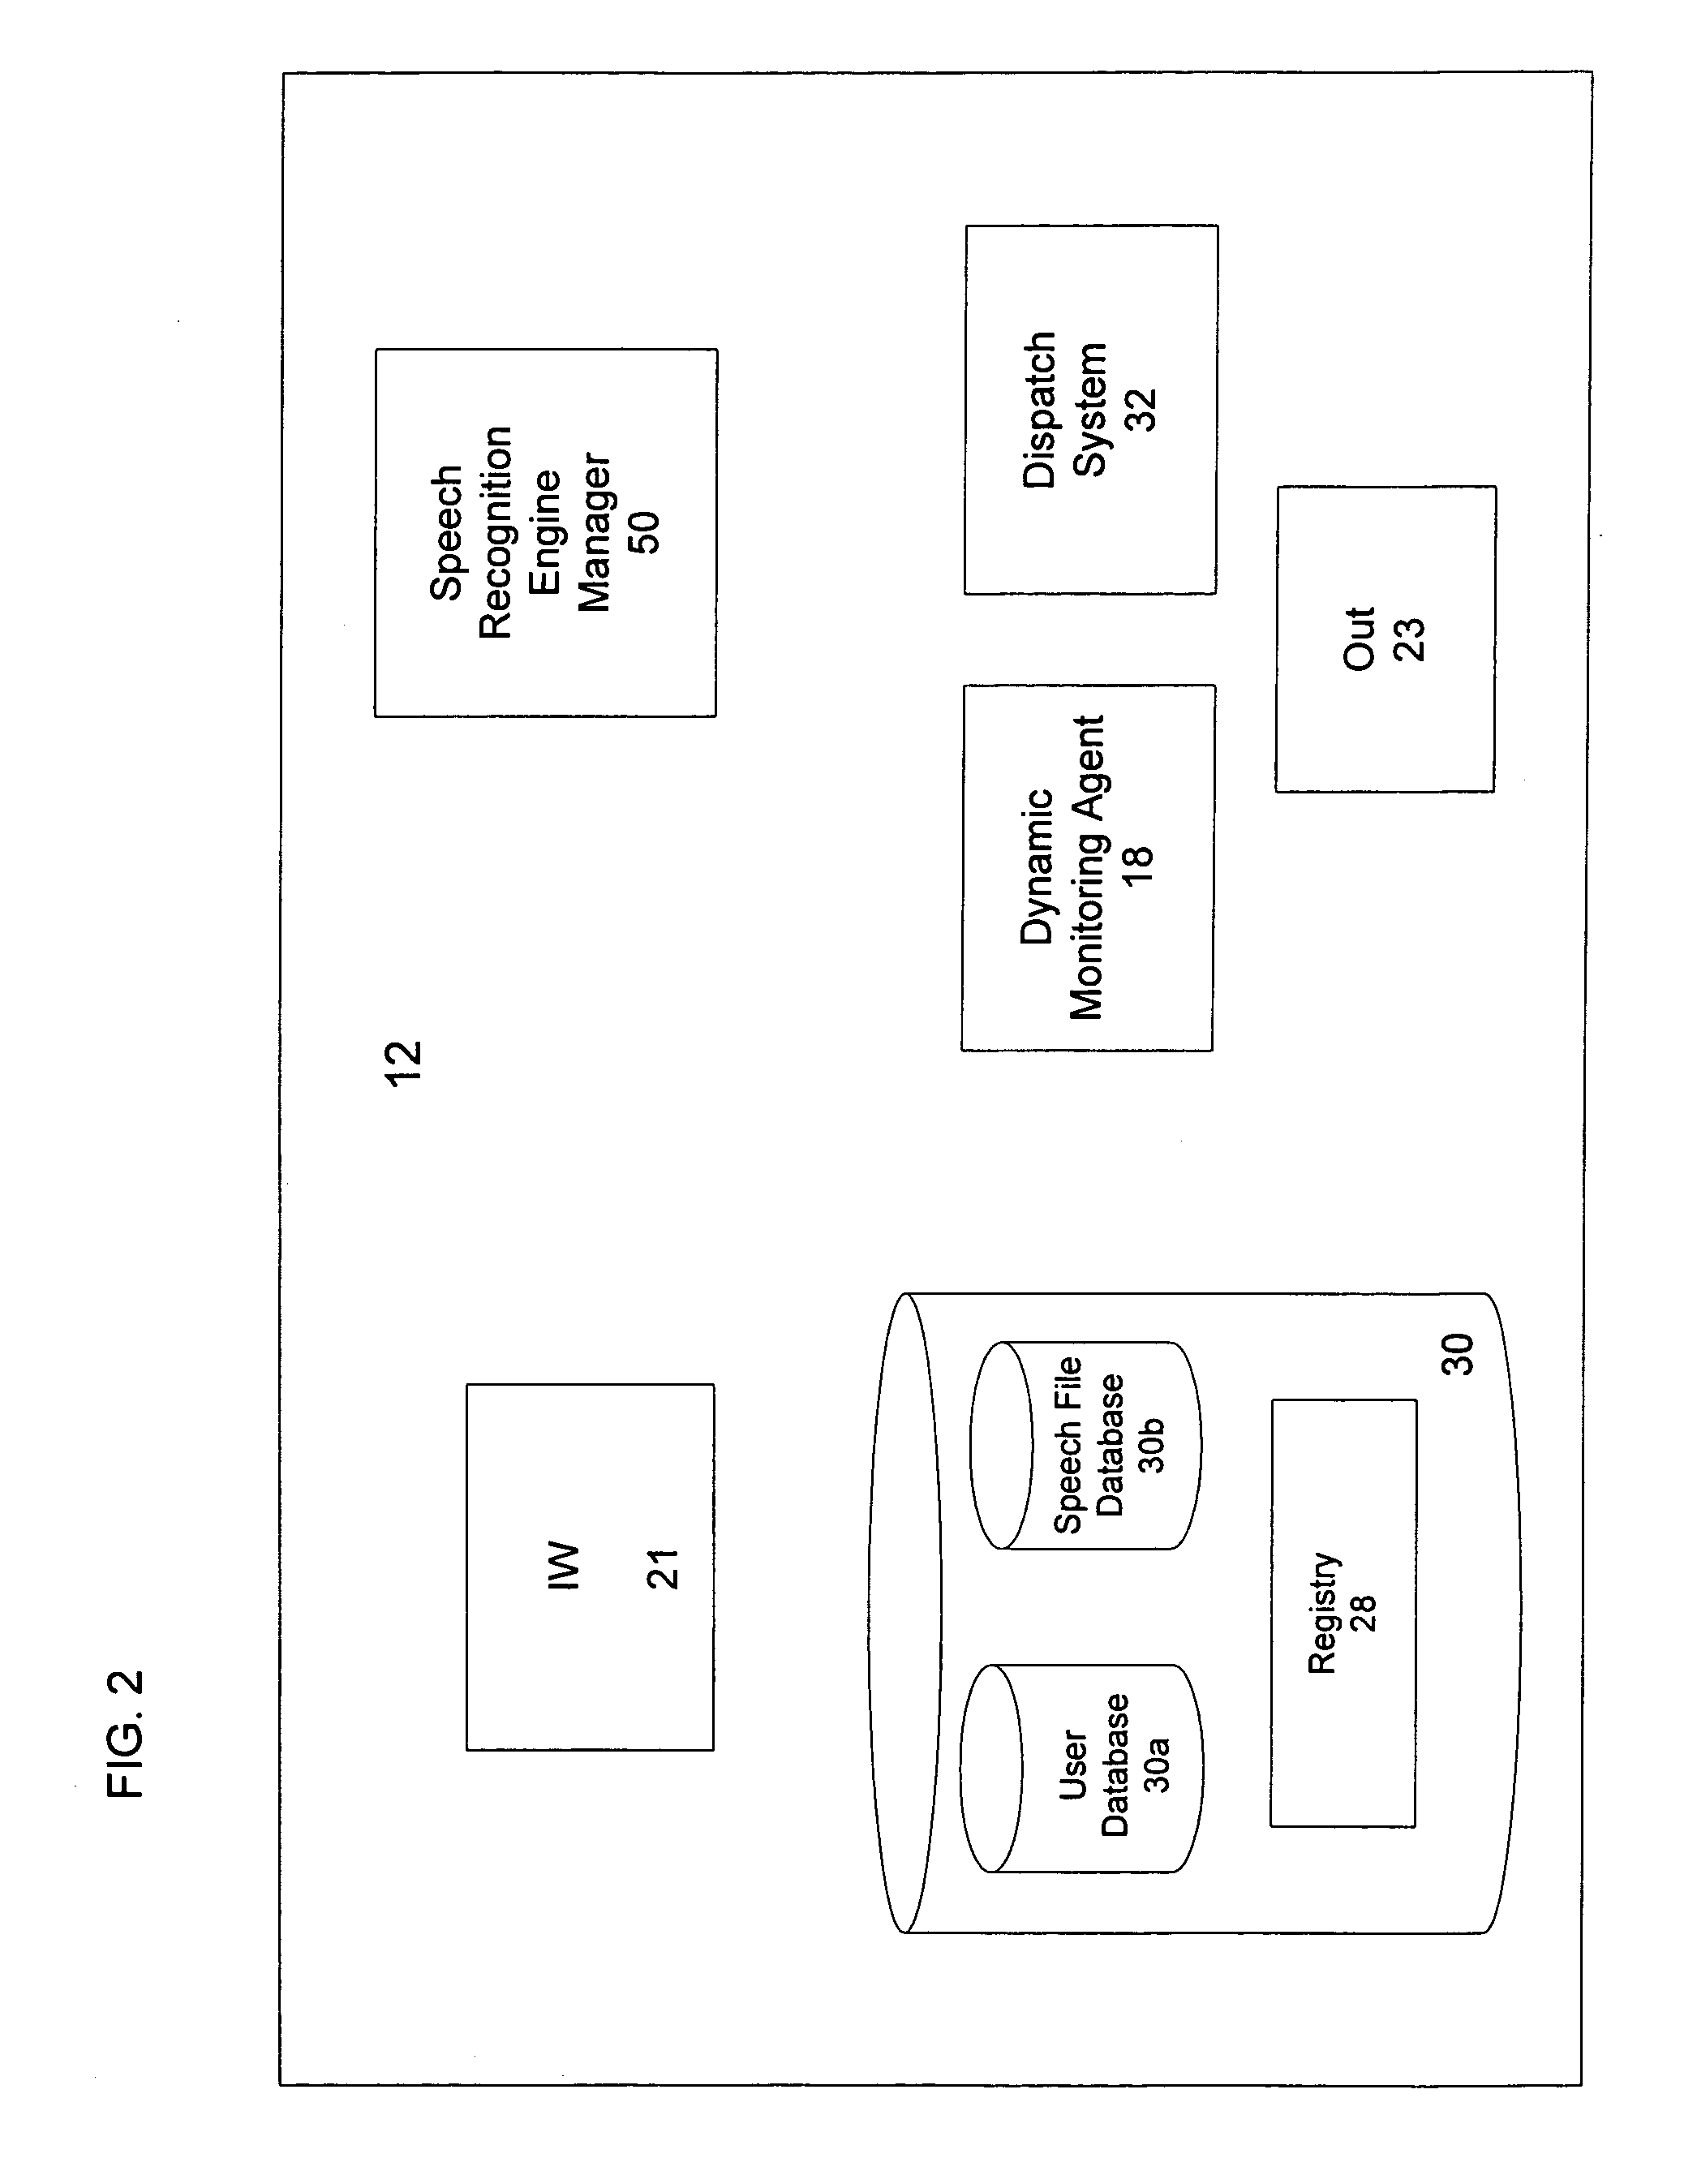 Distributed speech recognition system